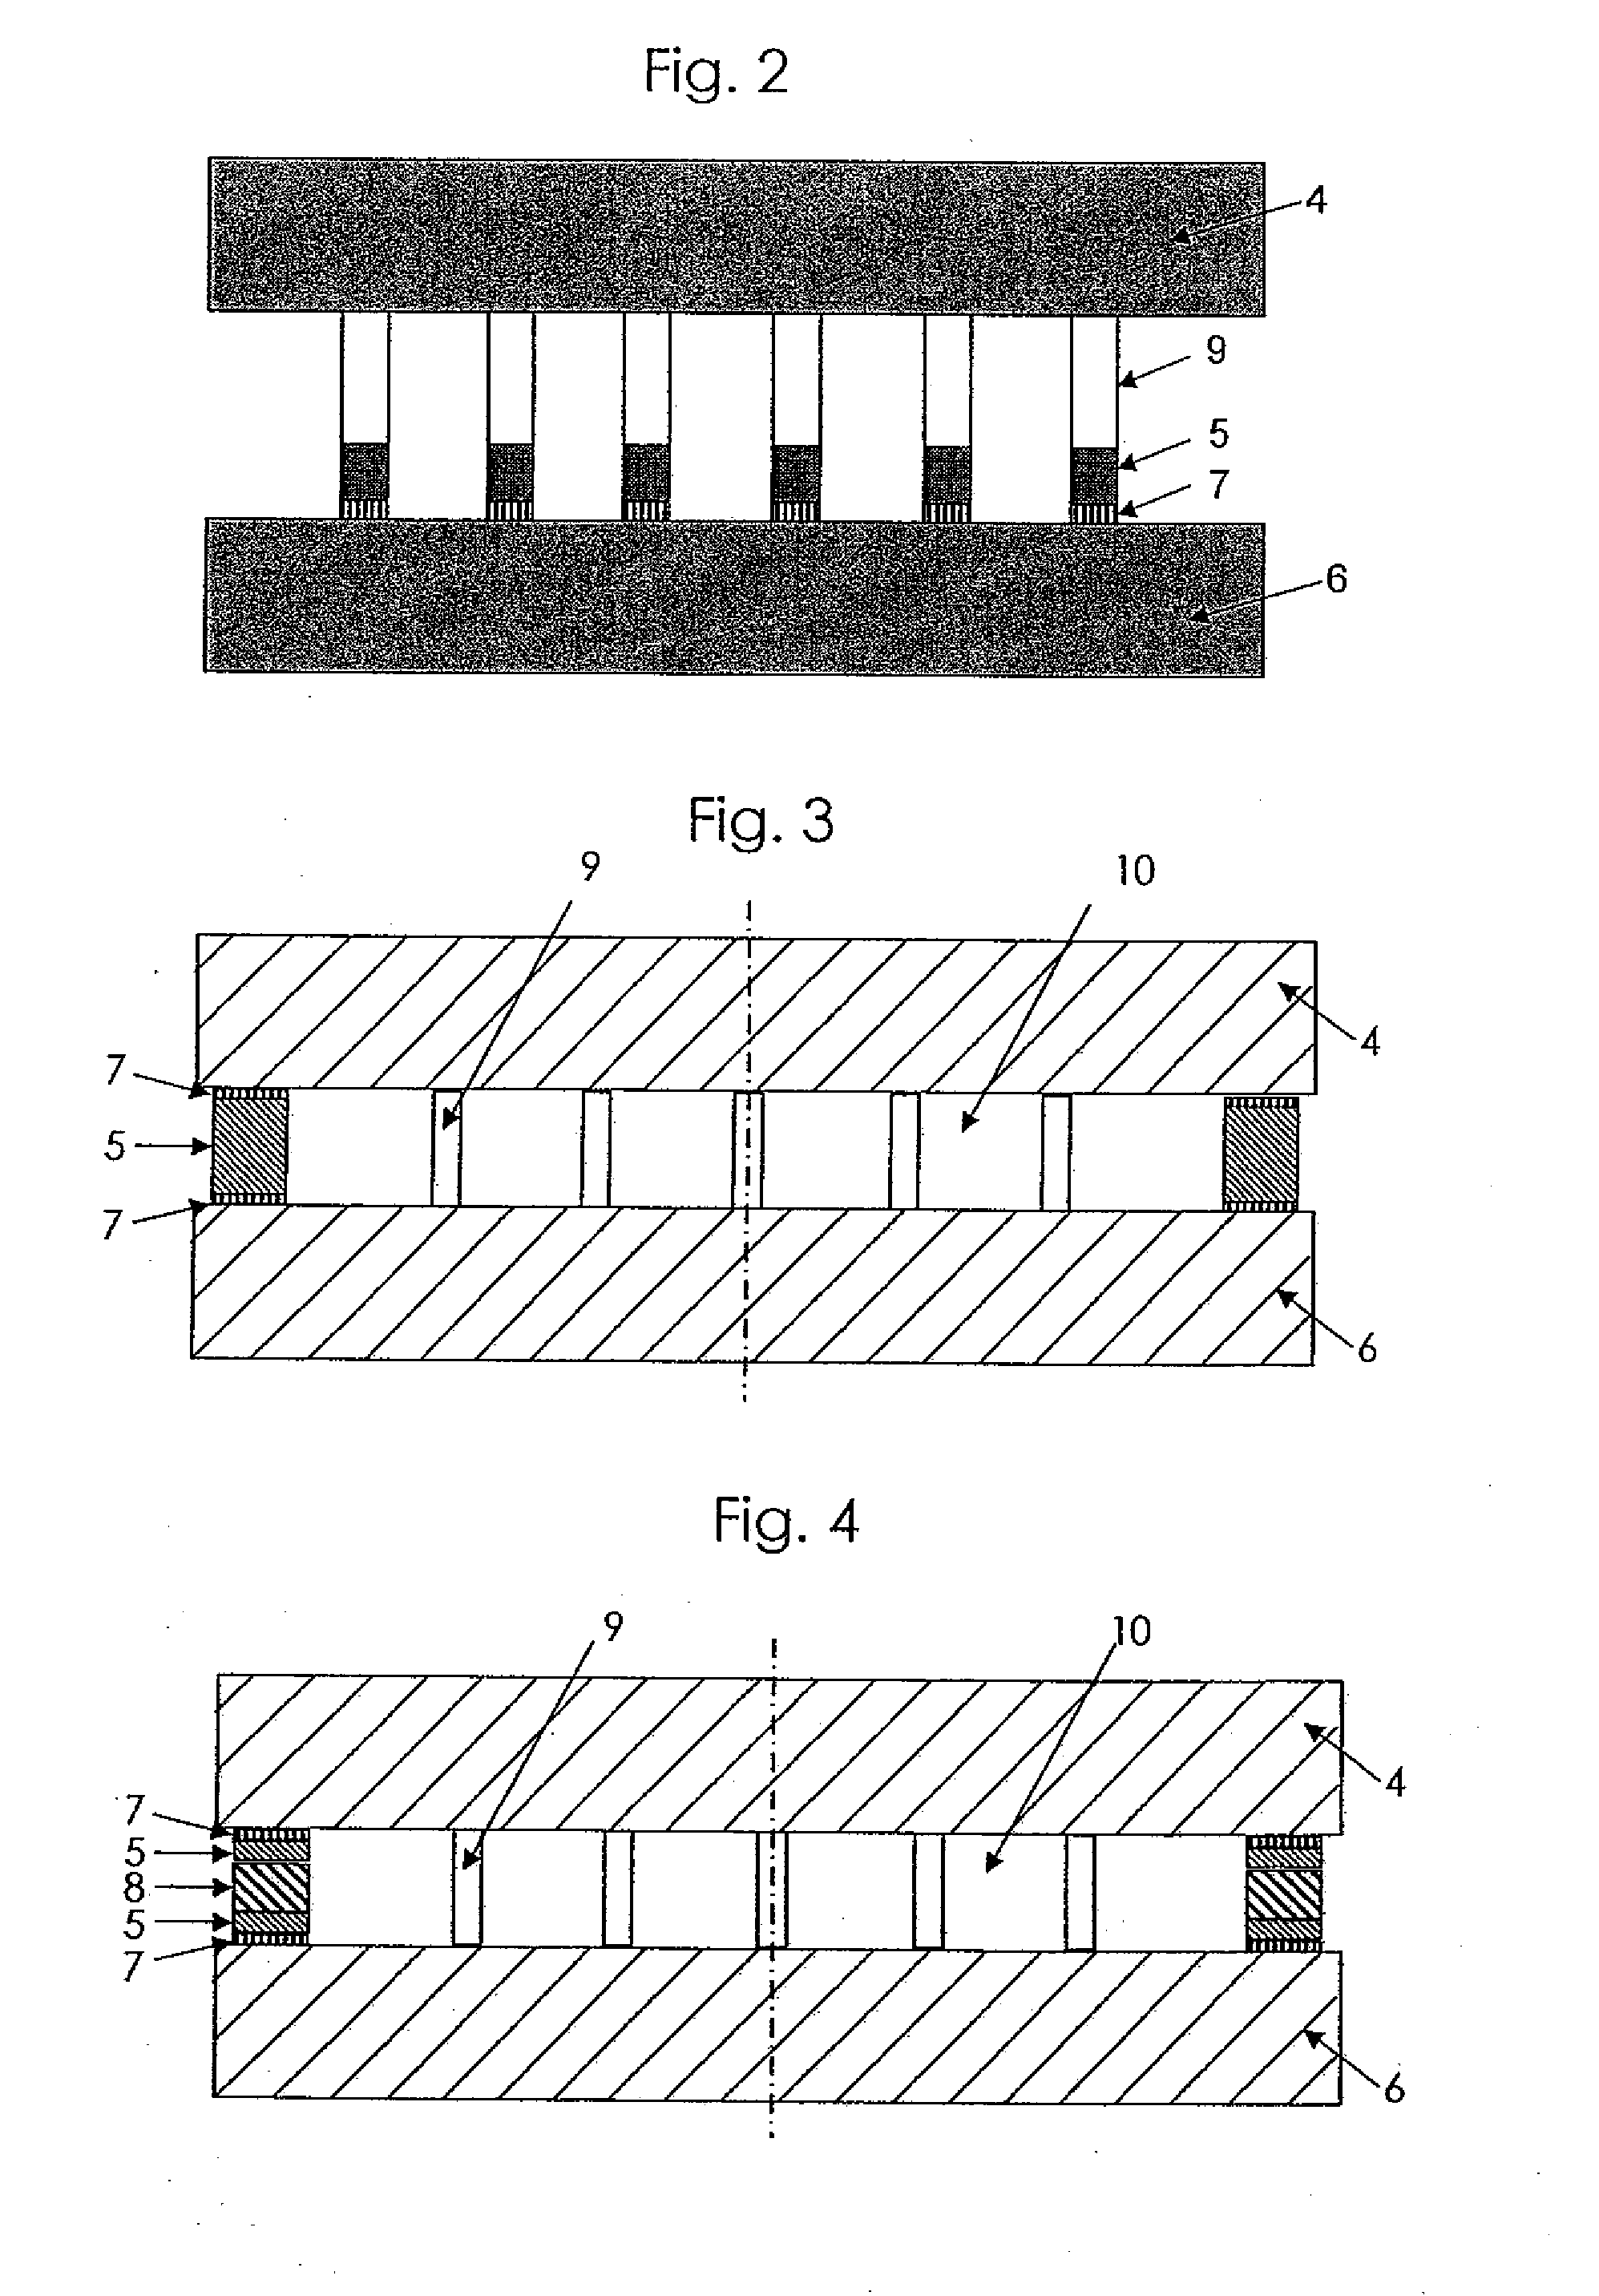 Method for the permanent connection of two components by means of glass or metal solder